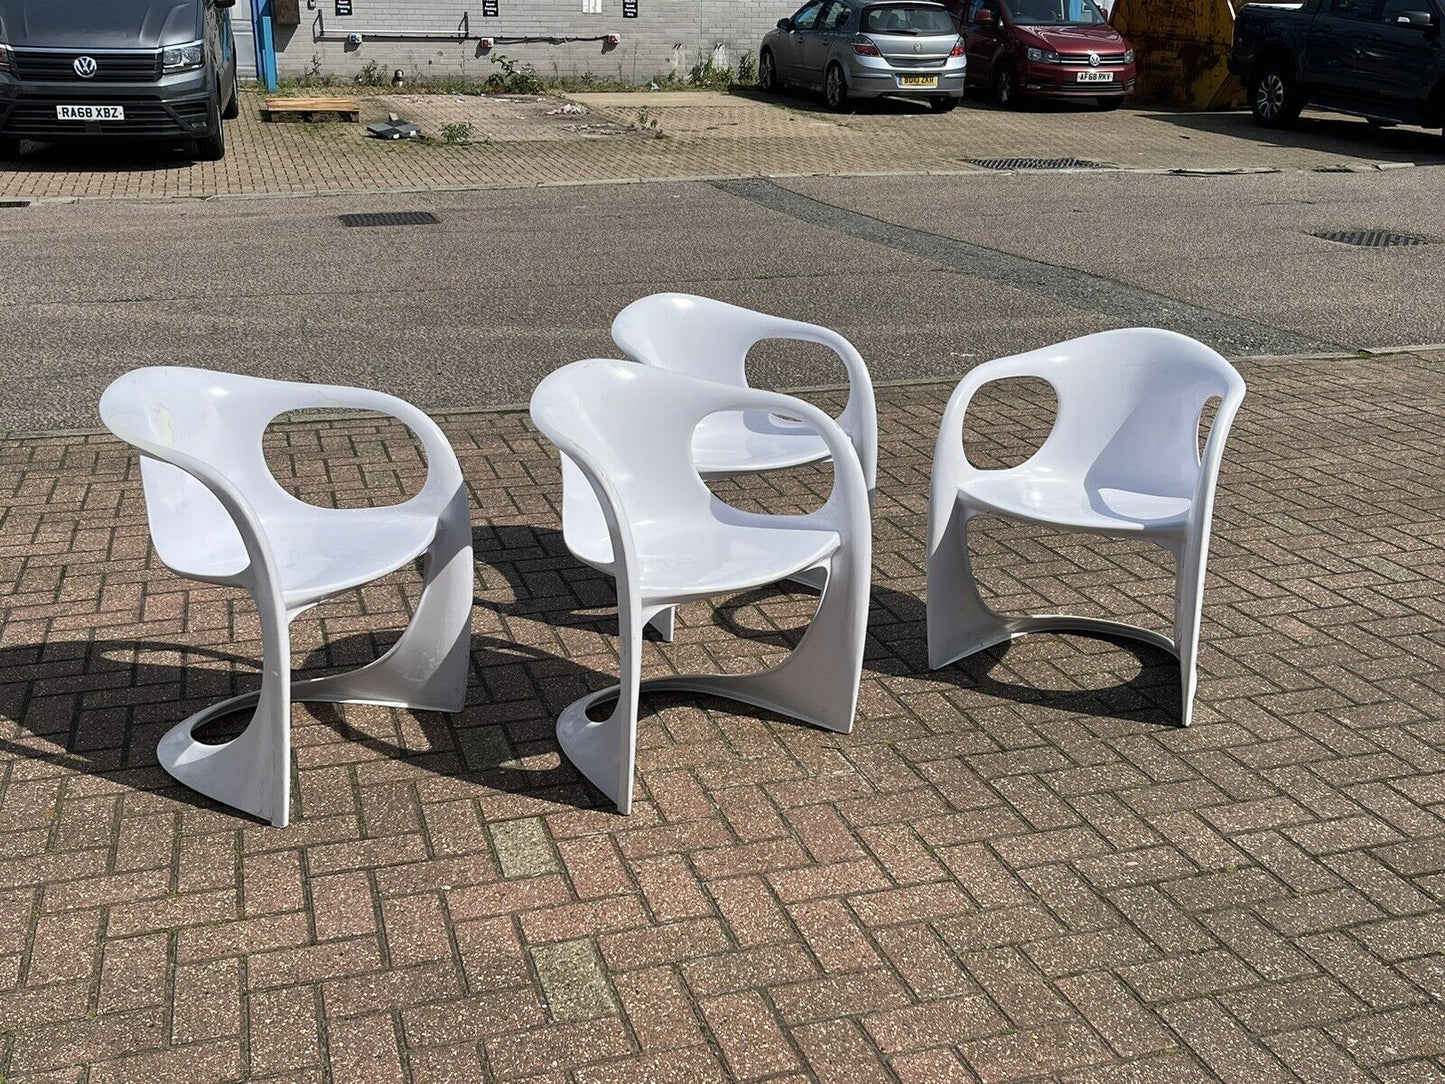 4 Vintage Casalino Patio Chairs. They Stack Too.